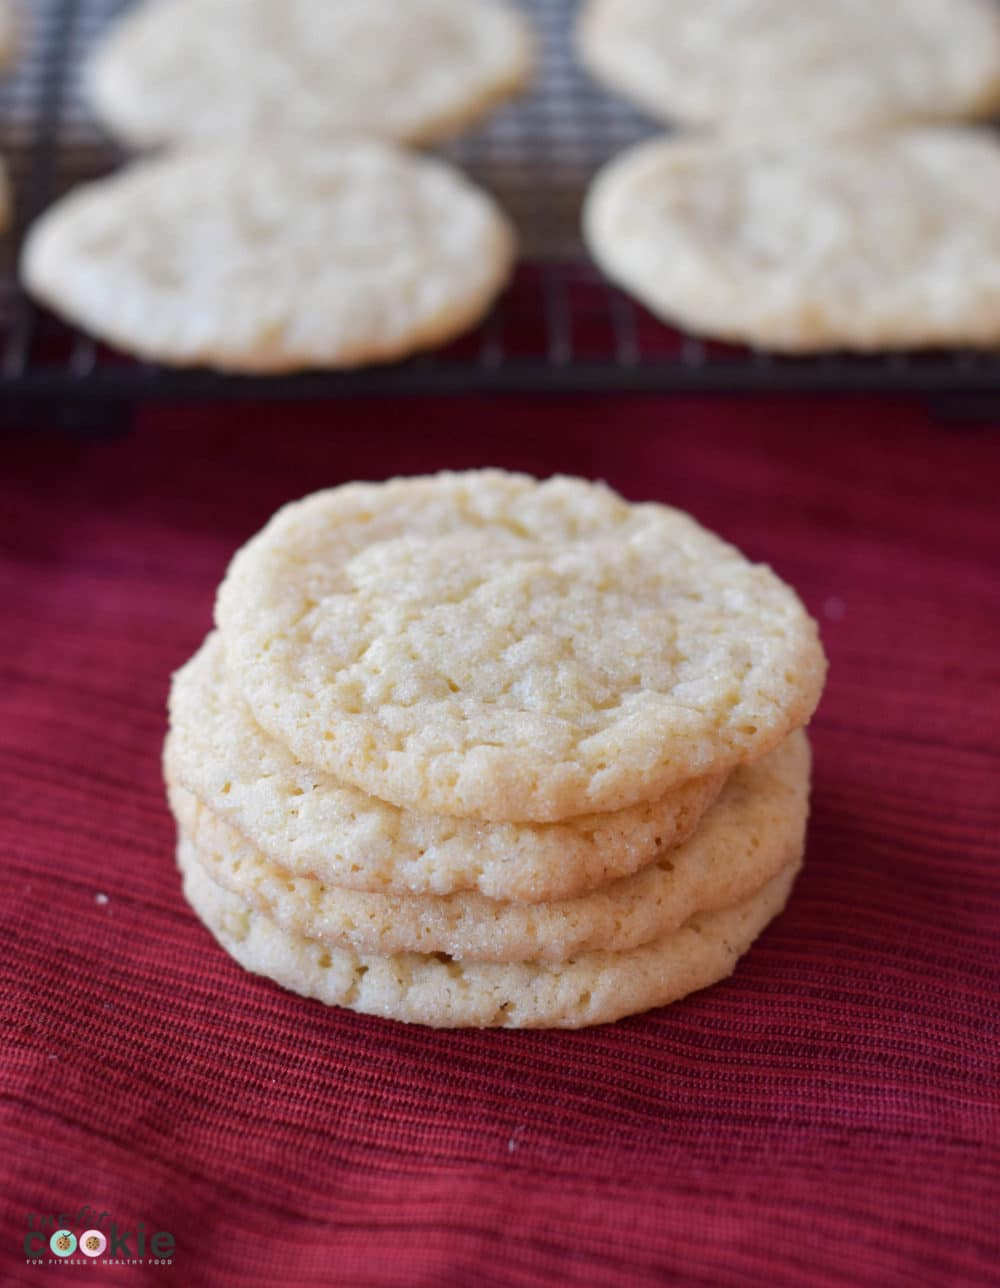 These No-Chill Vegan Sugar Cookies are the perfect treat for parties or school treats! They are easy to make (no more chilling dough!) and have no eggs, dairy, soy, tree nuts, peanuts, or coconut - @TheFitCookie #cookies #vegan #nutfree